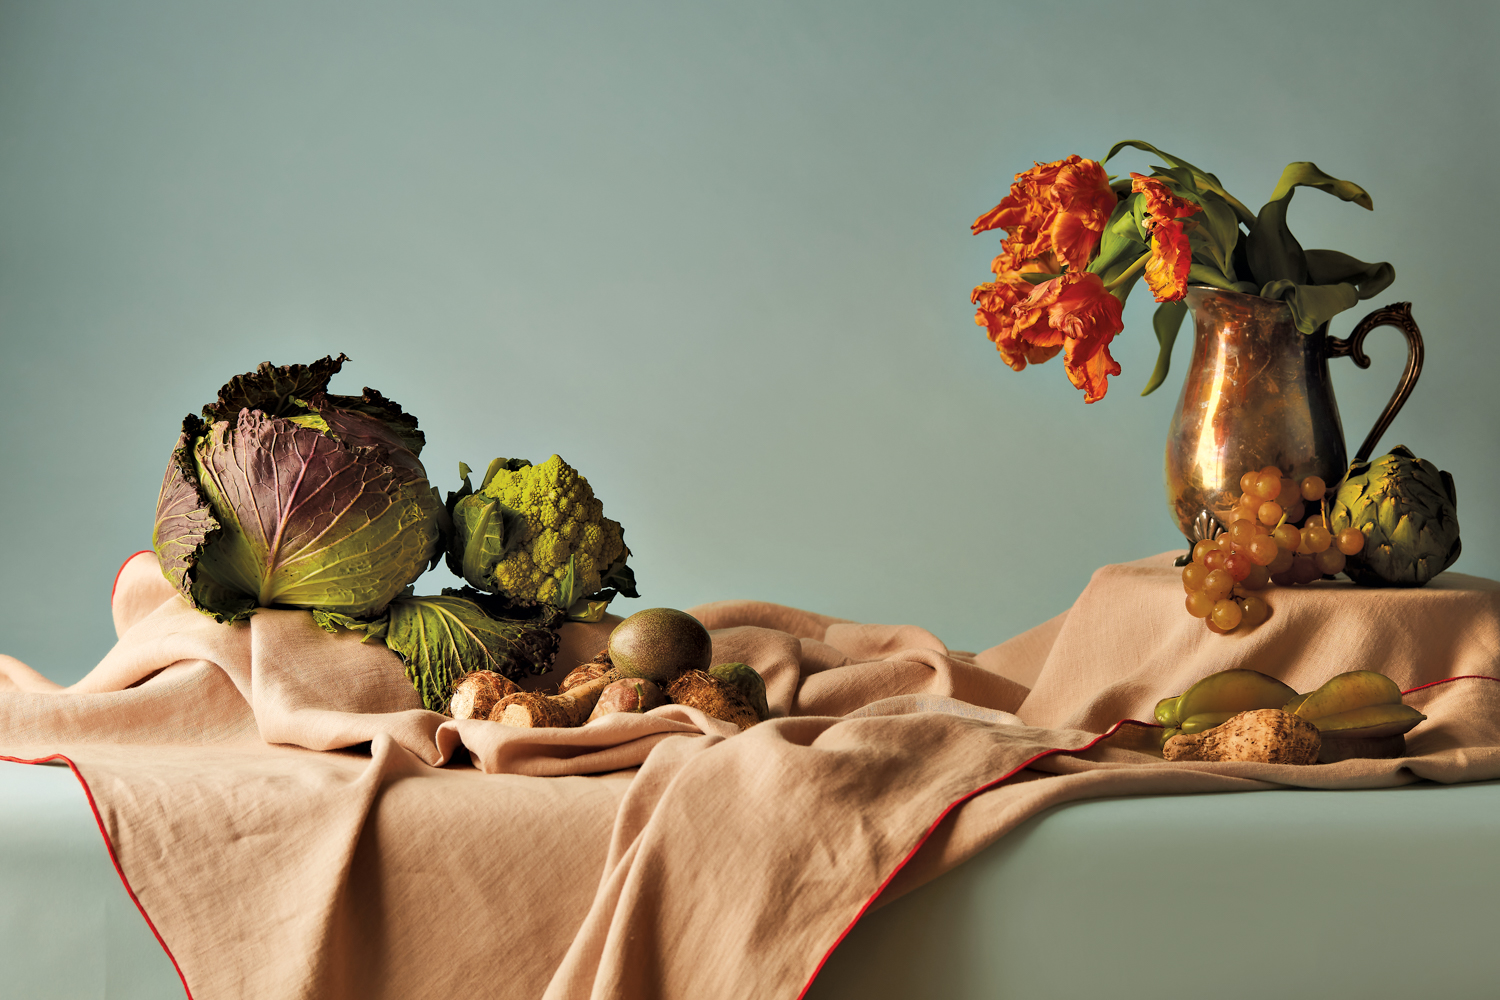 Ocher-colored tablecloth topped with orange flowers and various green vegetables.